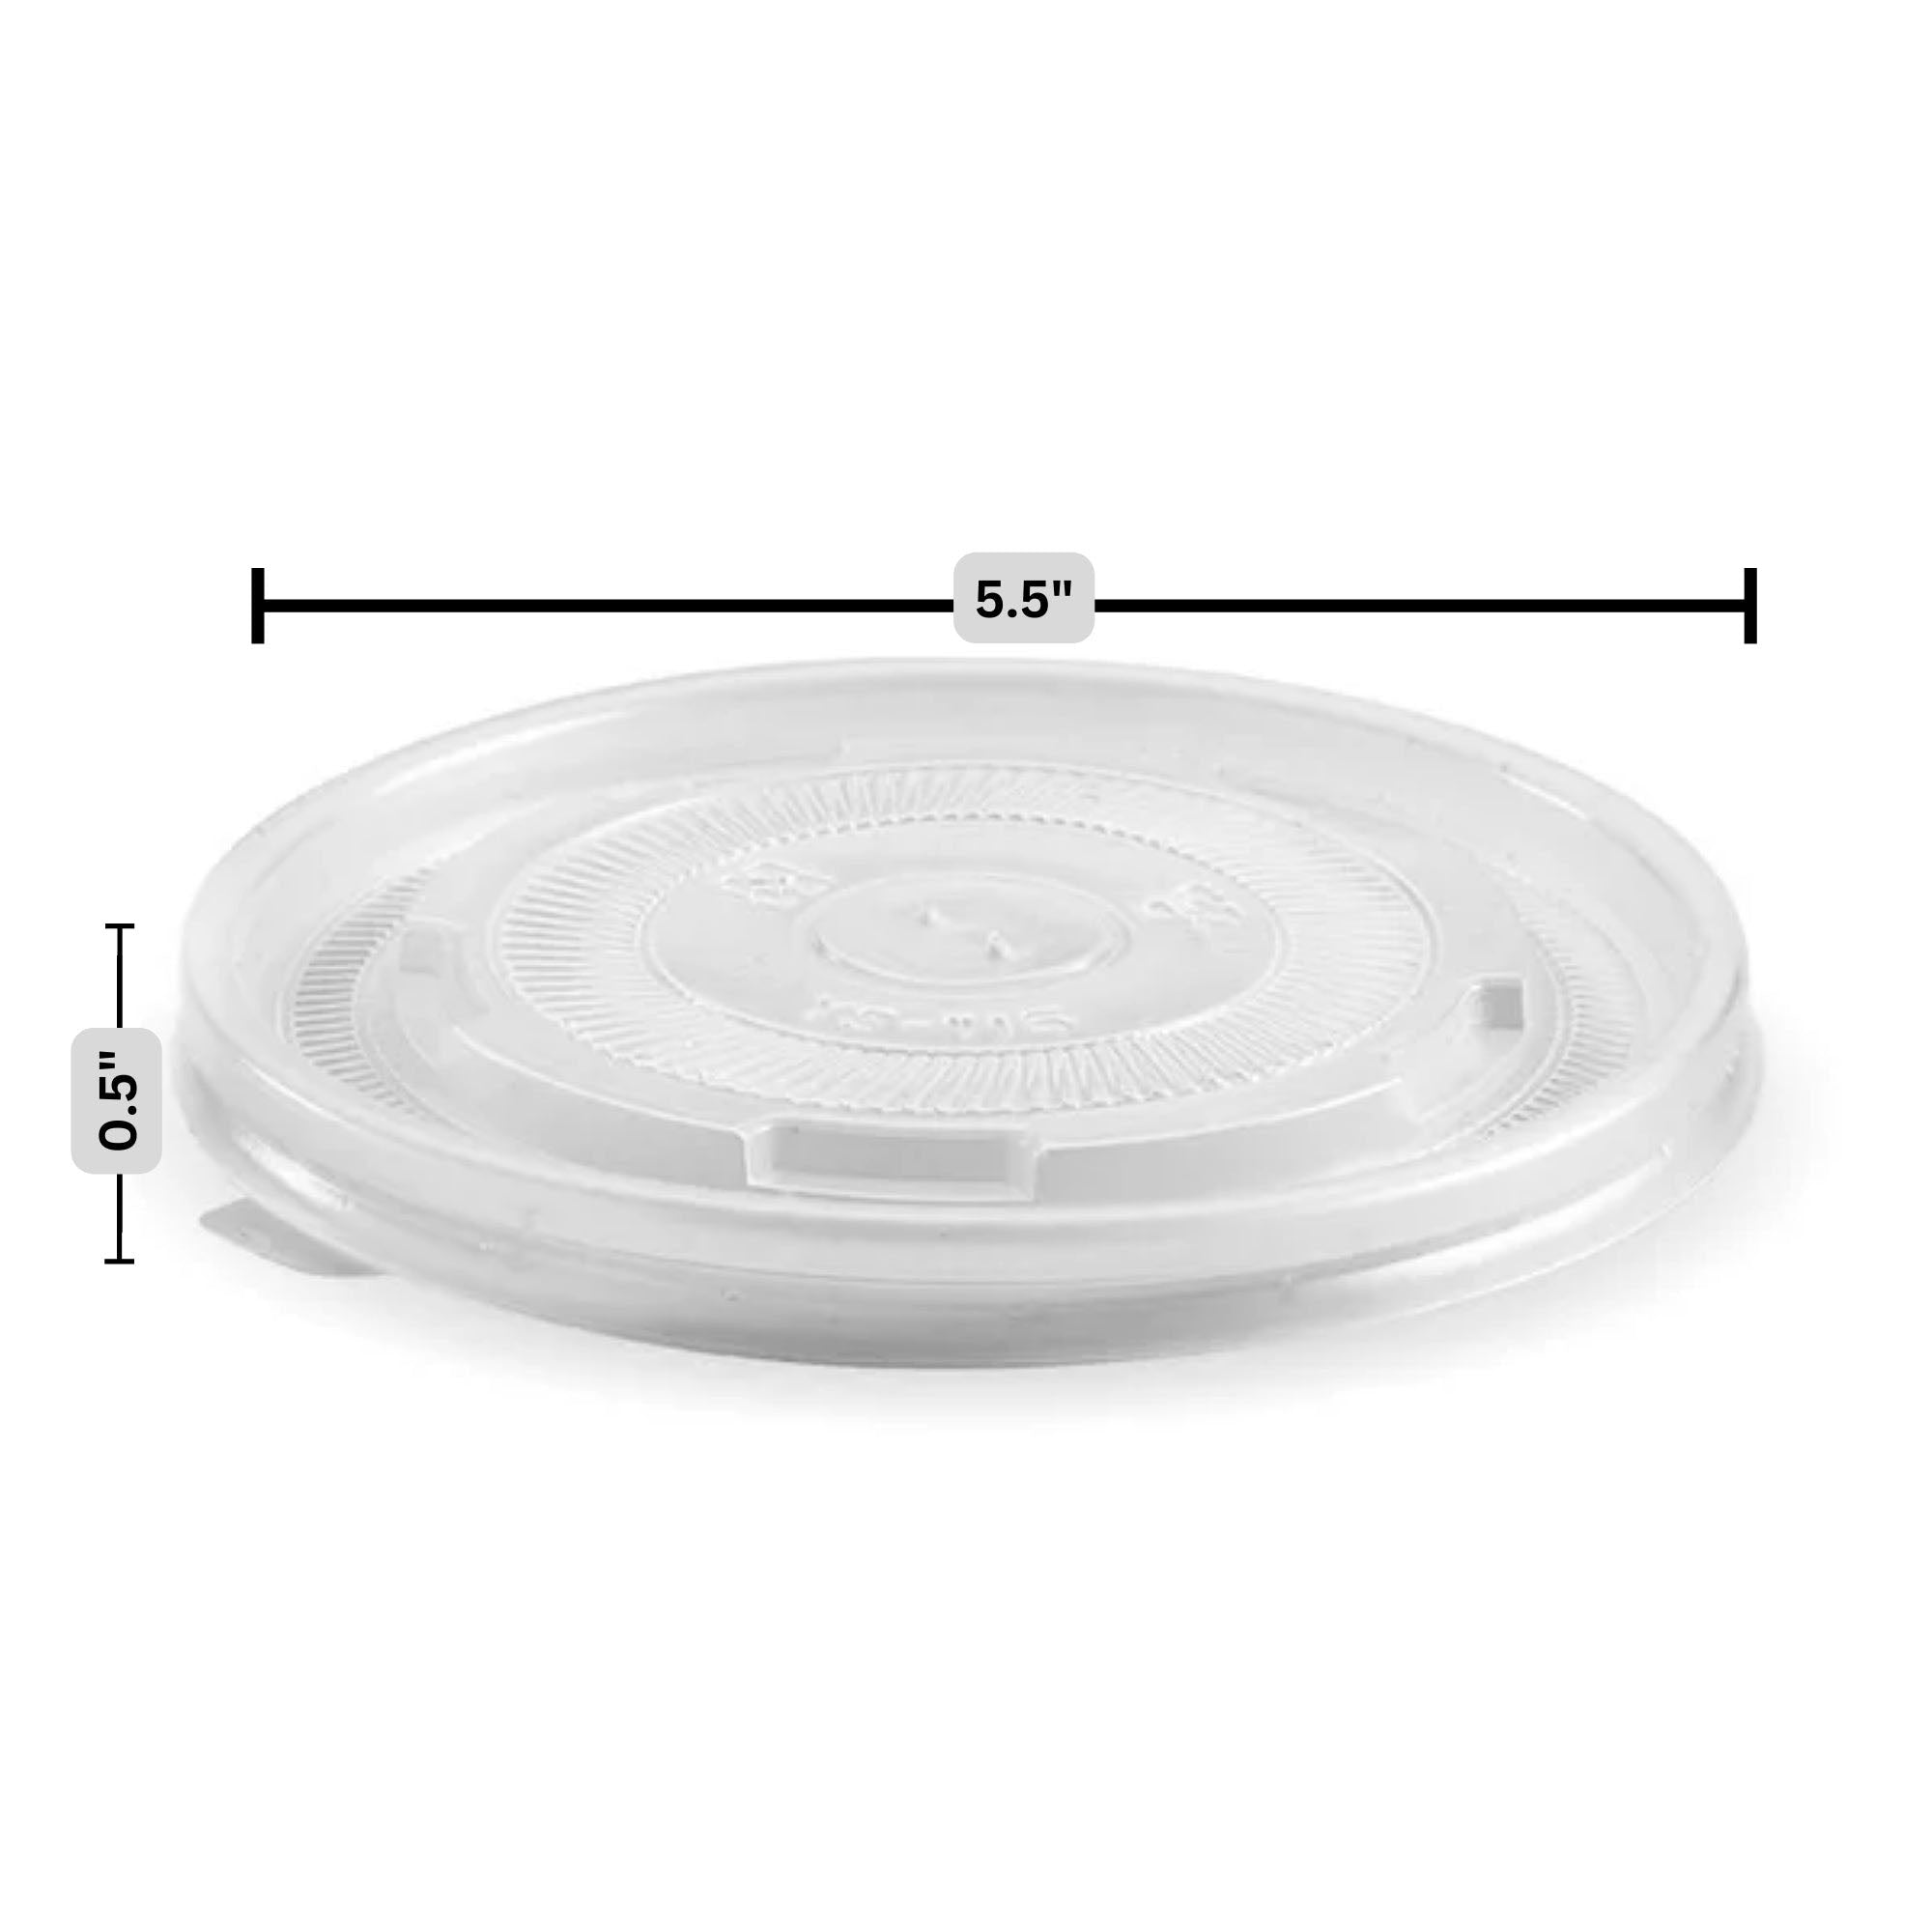 PP Bowl Lid, avoid leaks, durable, warming, biodegradable, paper flat lids, freshness, takeout, Packaging, easy visibility, food safe, avoid leaks, high-quality, dinnerware, recyclable lids, Ecosmart, sustainable, coffee, tea